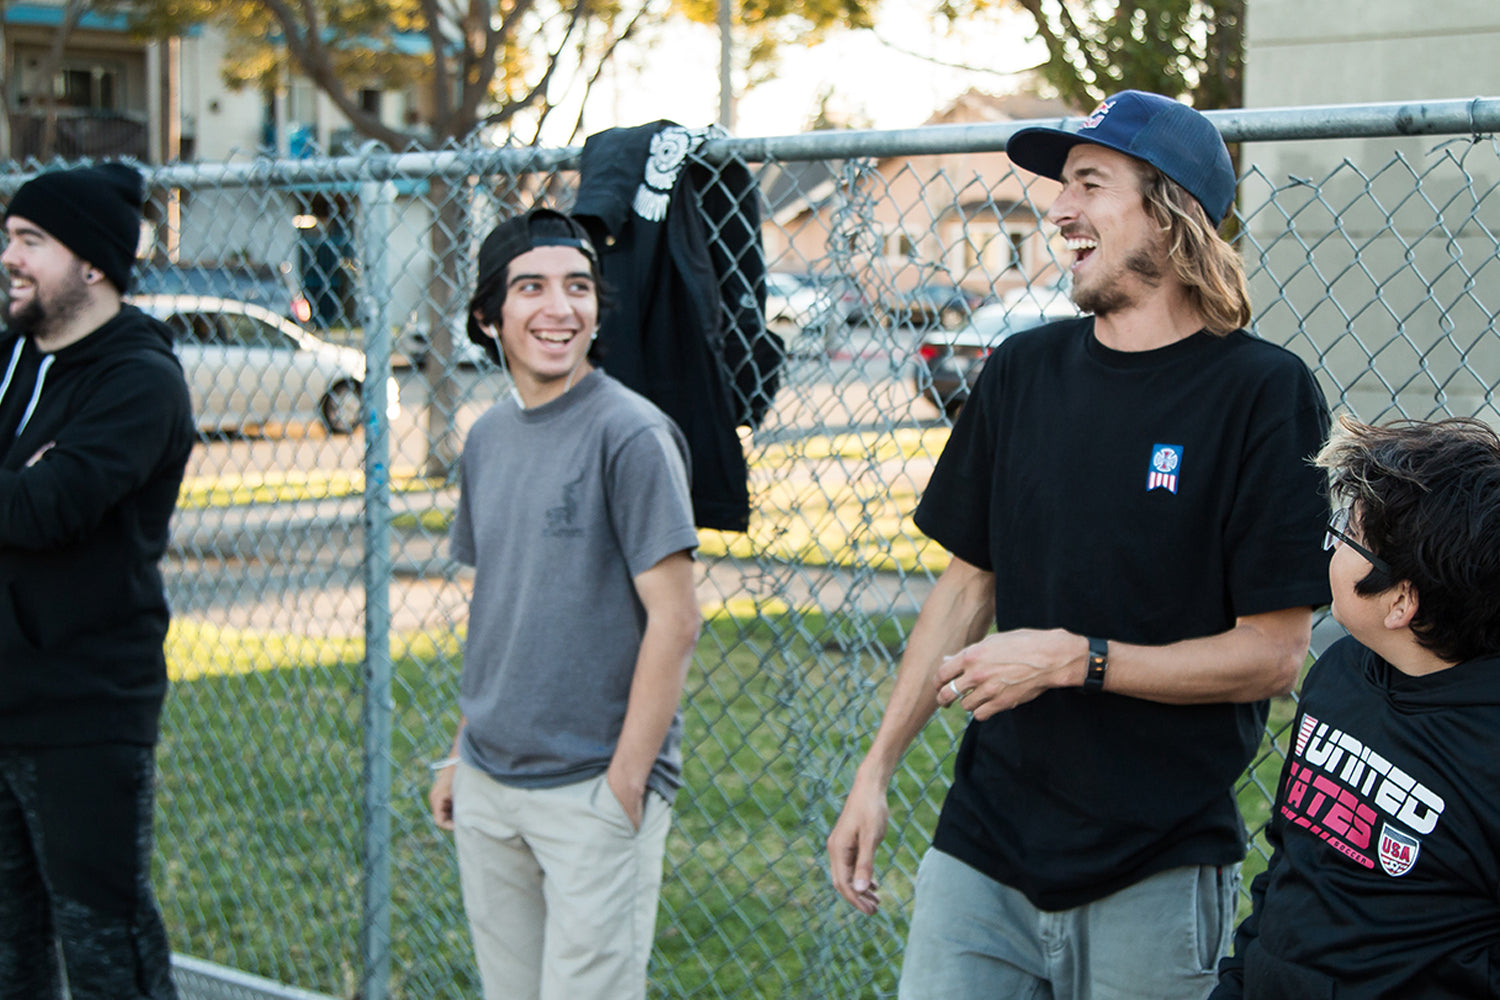 stoked-ride-shop-welcoming-beginners-to-skateboarding-featuring-NextUp-Foundation-4